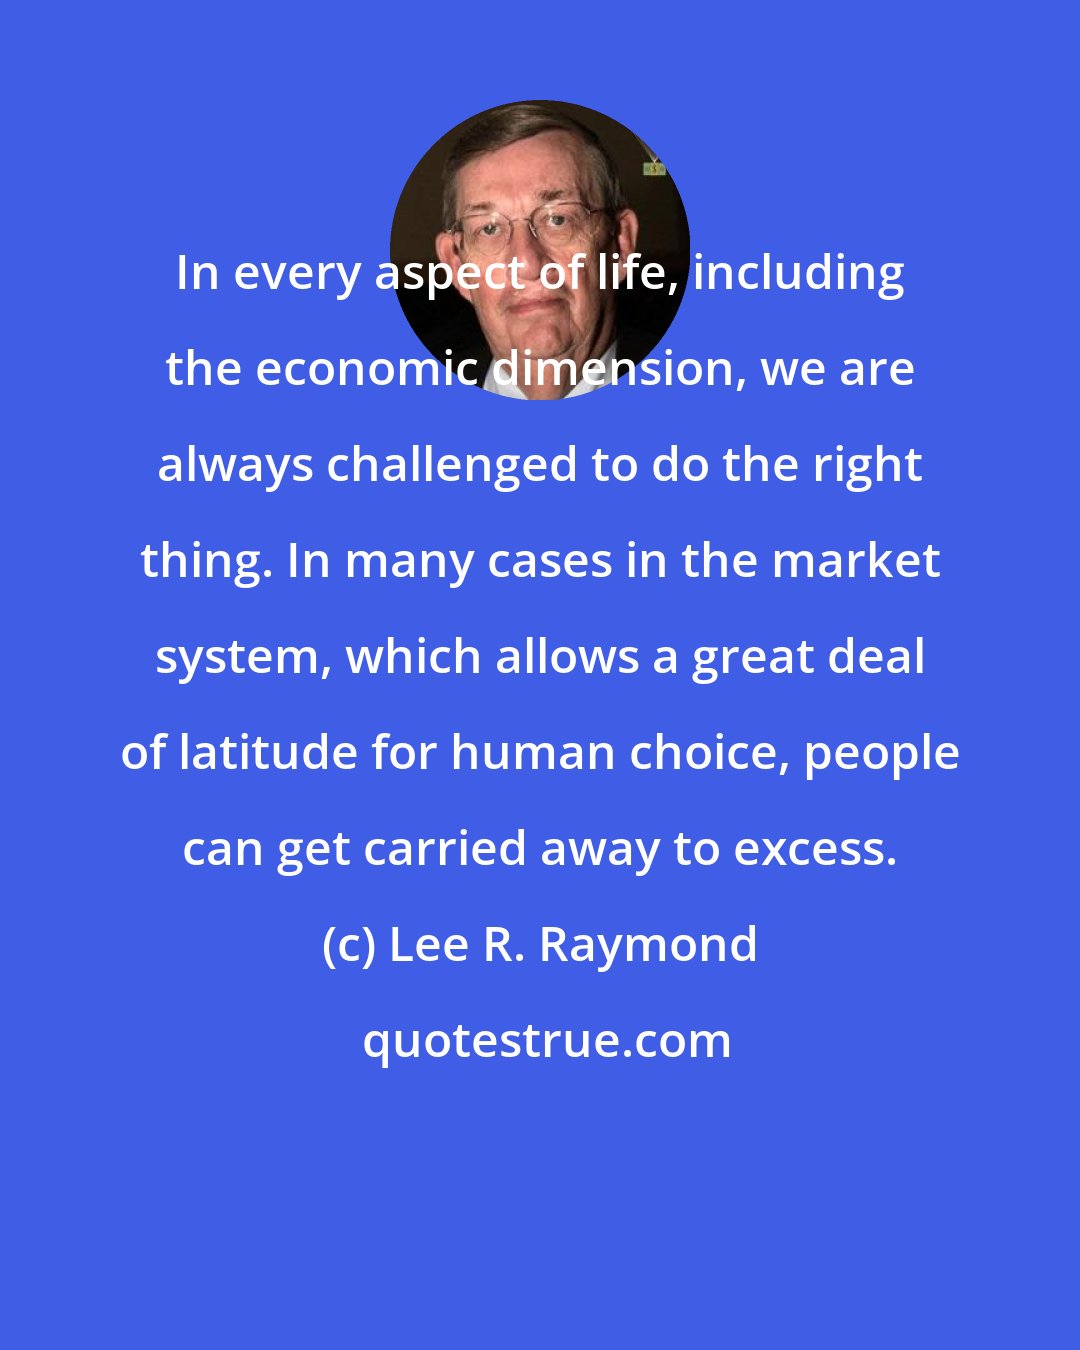 Lee R. Raymond: In every aspect of life, including the economic dimension, we are always challenged to do the right thing. In many cases in the market system, which allows a great deal of latitude for human choice, people can get carried away to excess.